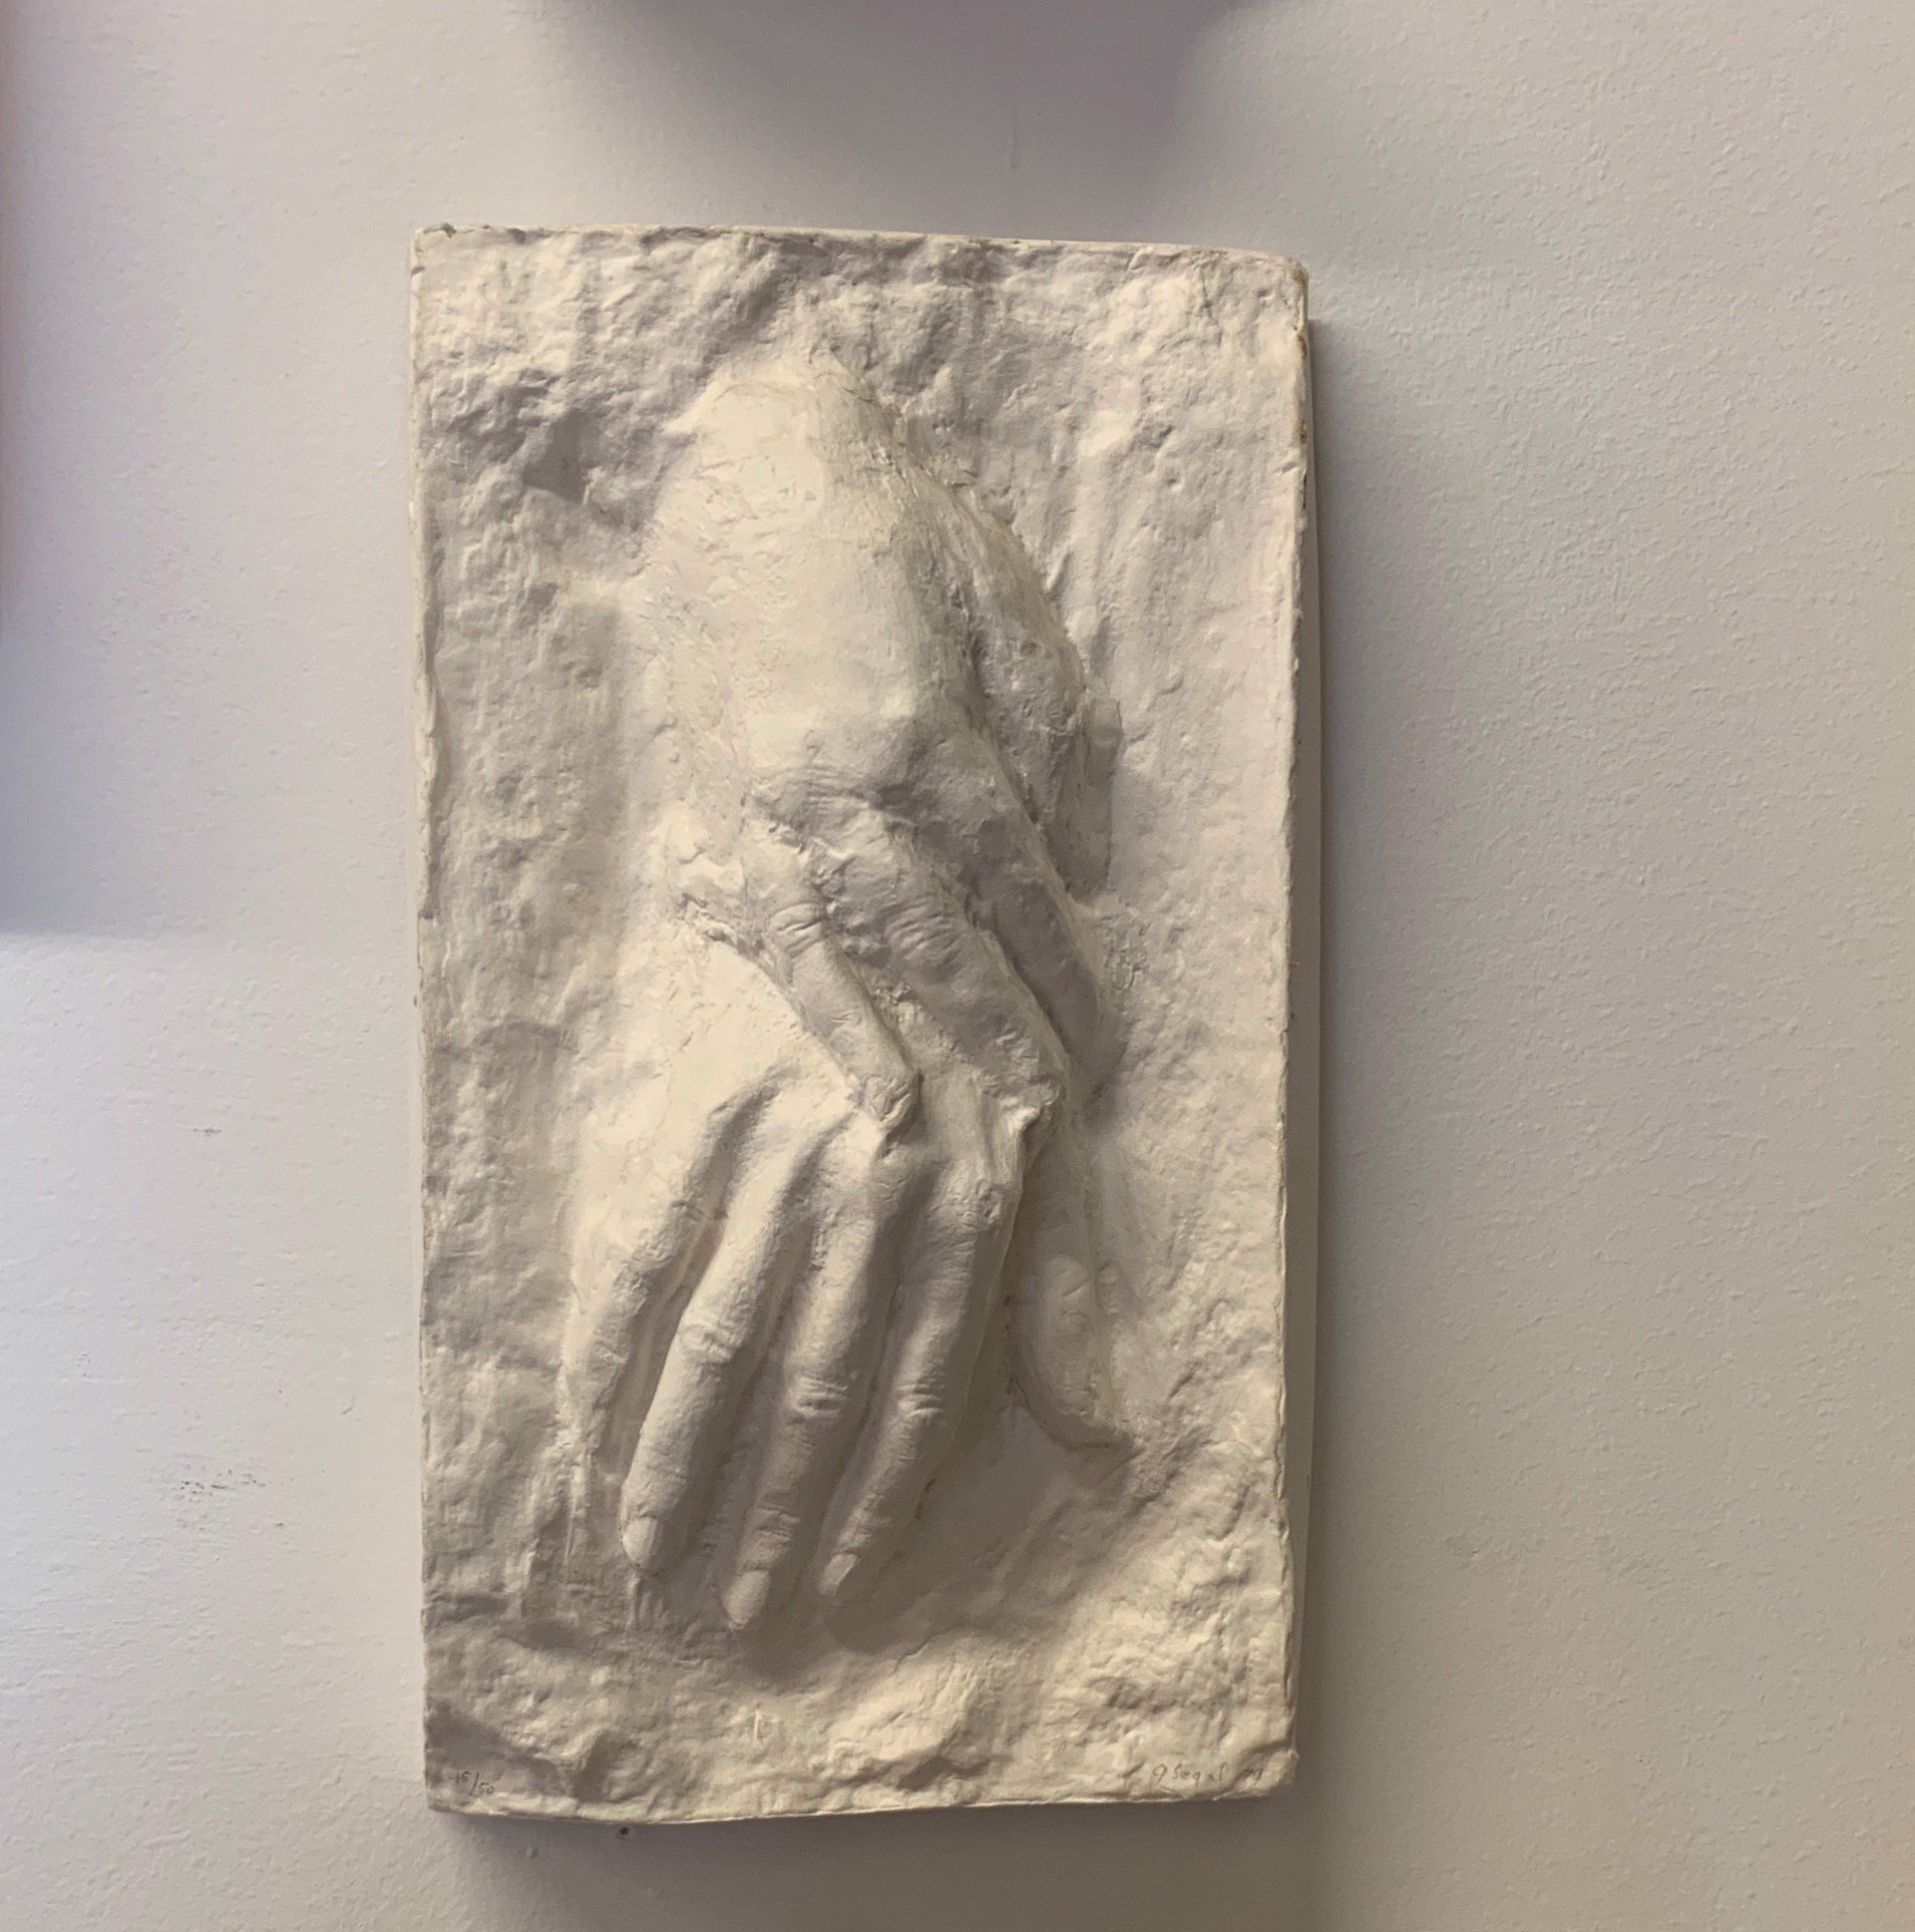 TWO HANDS I by George Segal